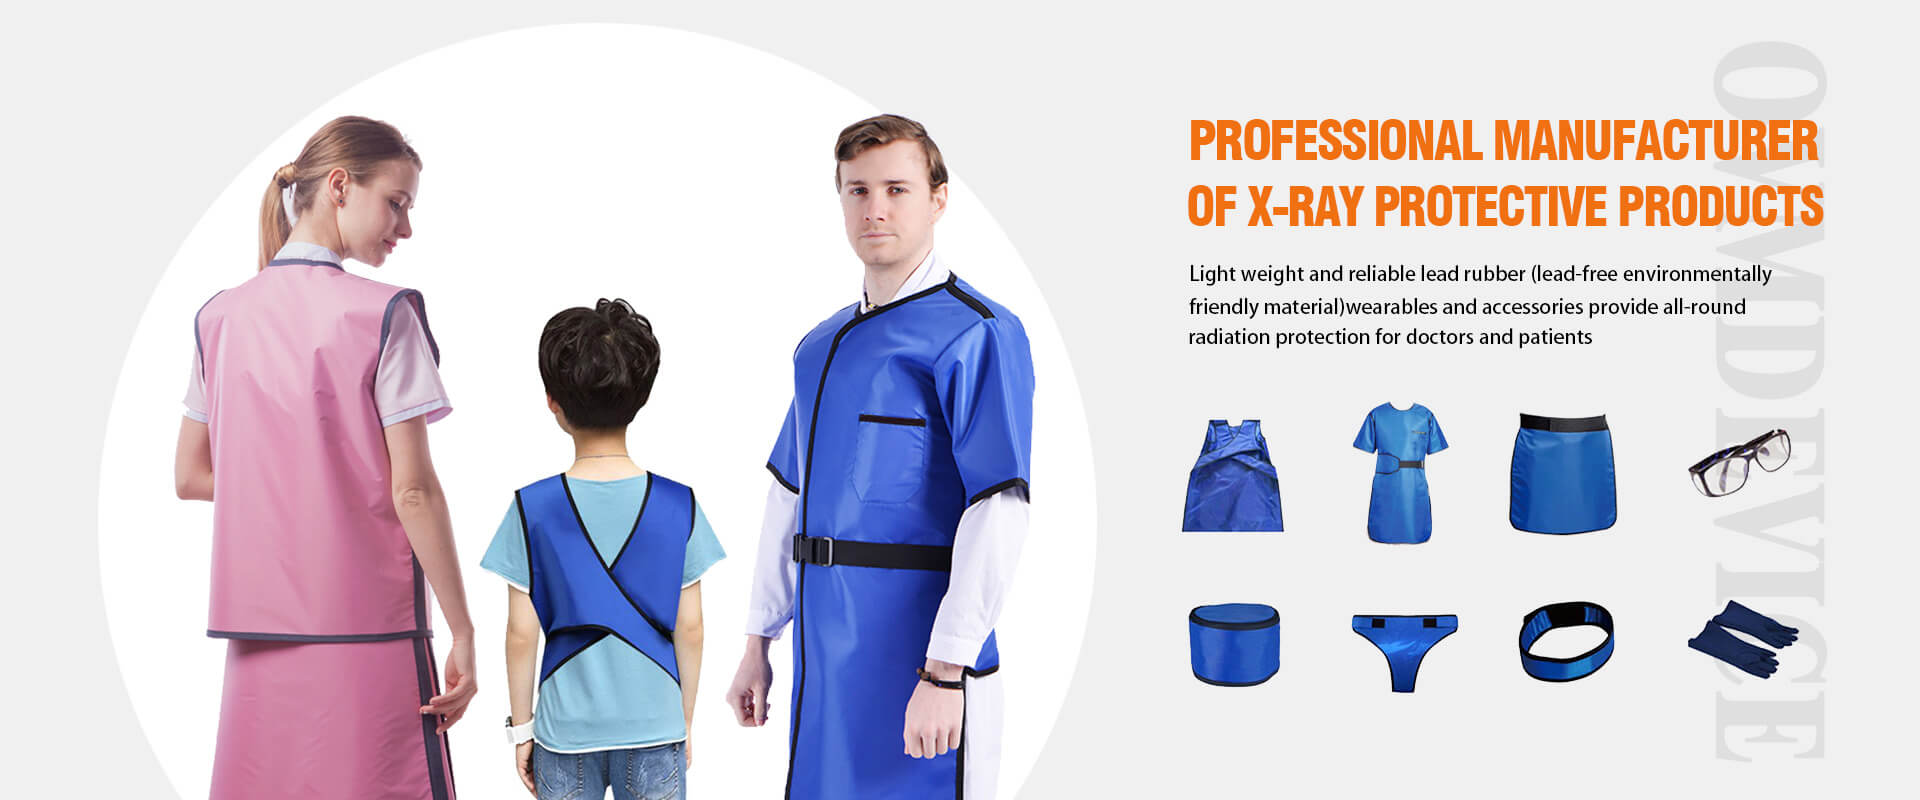 x-ray protective lead rubber cloth and wearable accessarys are made of ultra-thin lead rubber sheet, it has an effective protective effect on various rays in the hospital, and protects doctors and patients from radiation damage